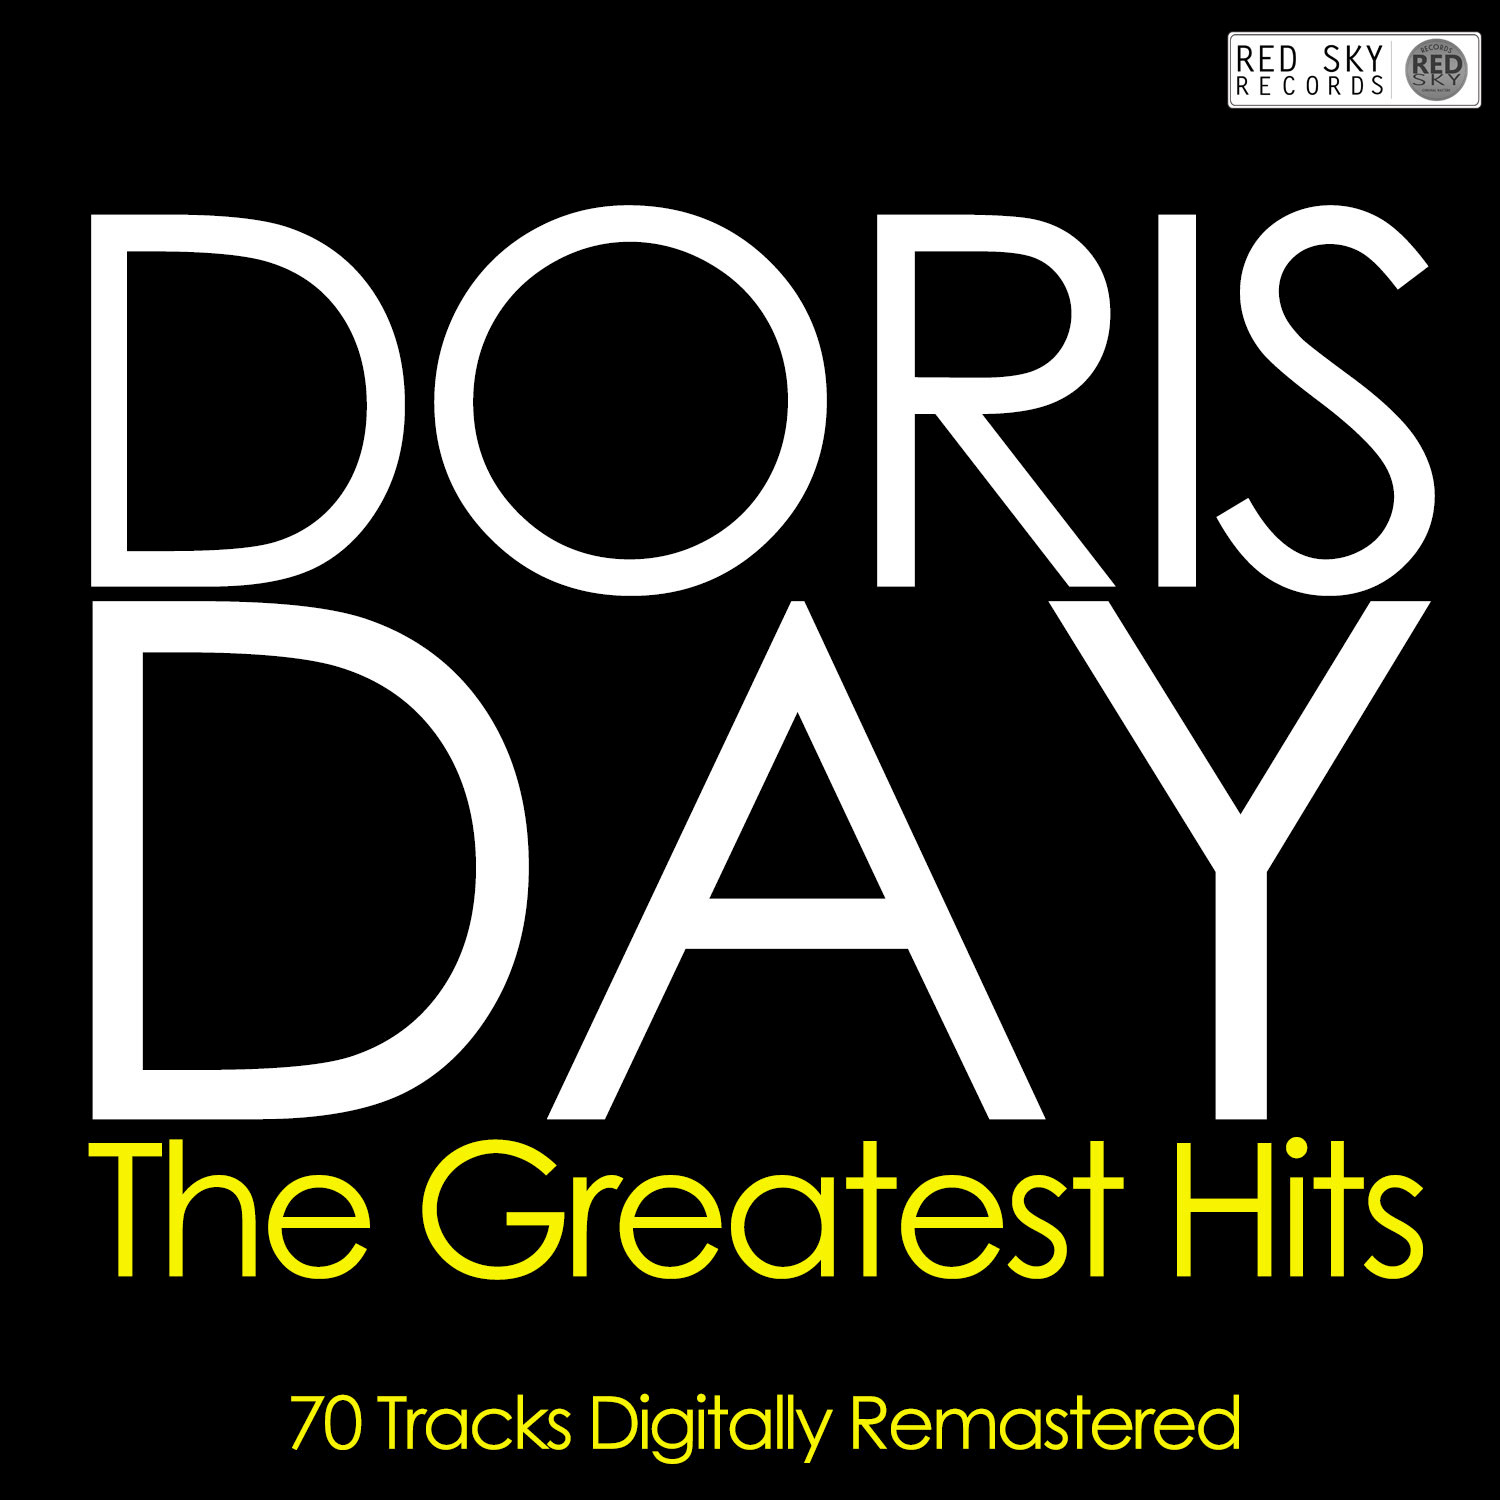 The Greatest Hits - 70 Tracks Digitally Remastered